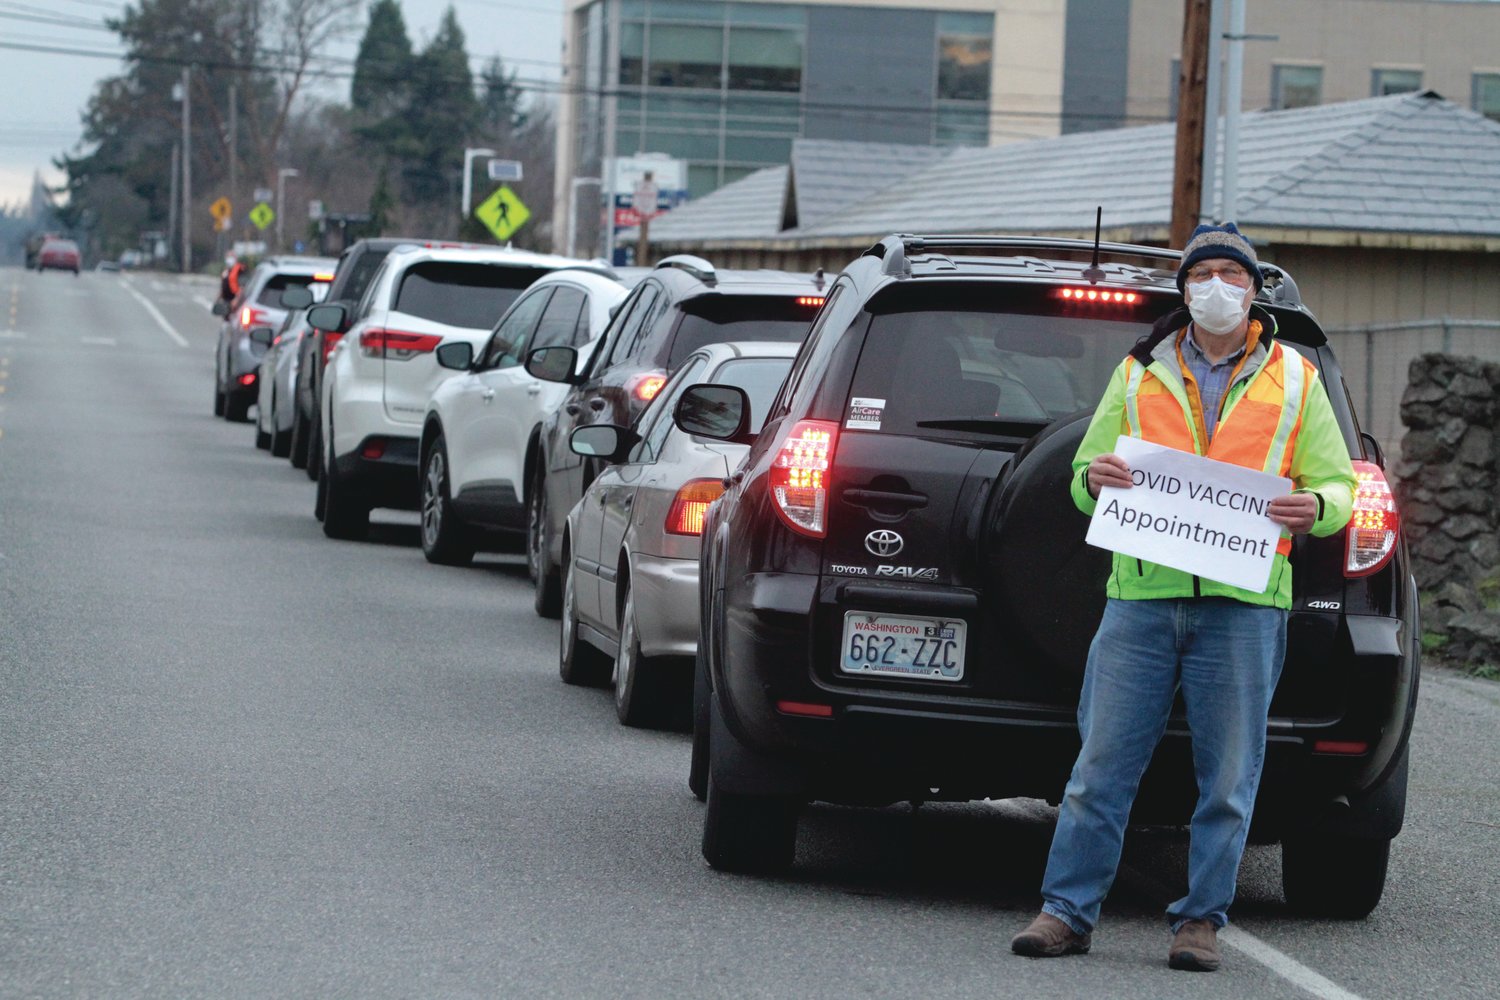 Volunteer David Tinker helps drivers get in the queue for Jefferson Healthcare’s drive-thru immunization clinic in Port Townsend last Thursday. At one point, the line of vehicles stretched from the hospital to Sims Way West.